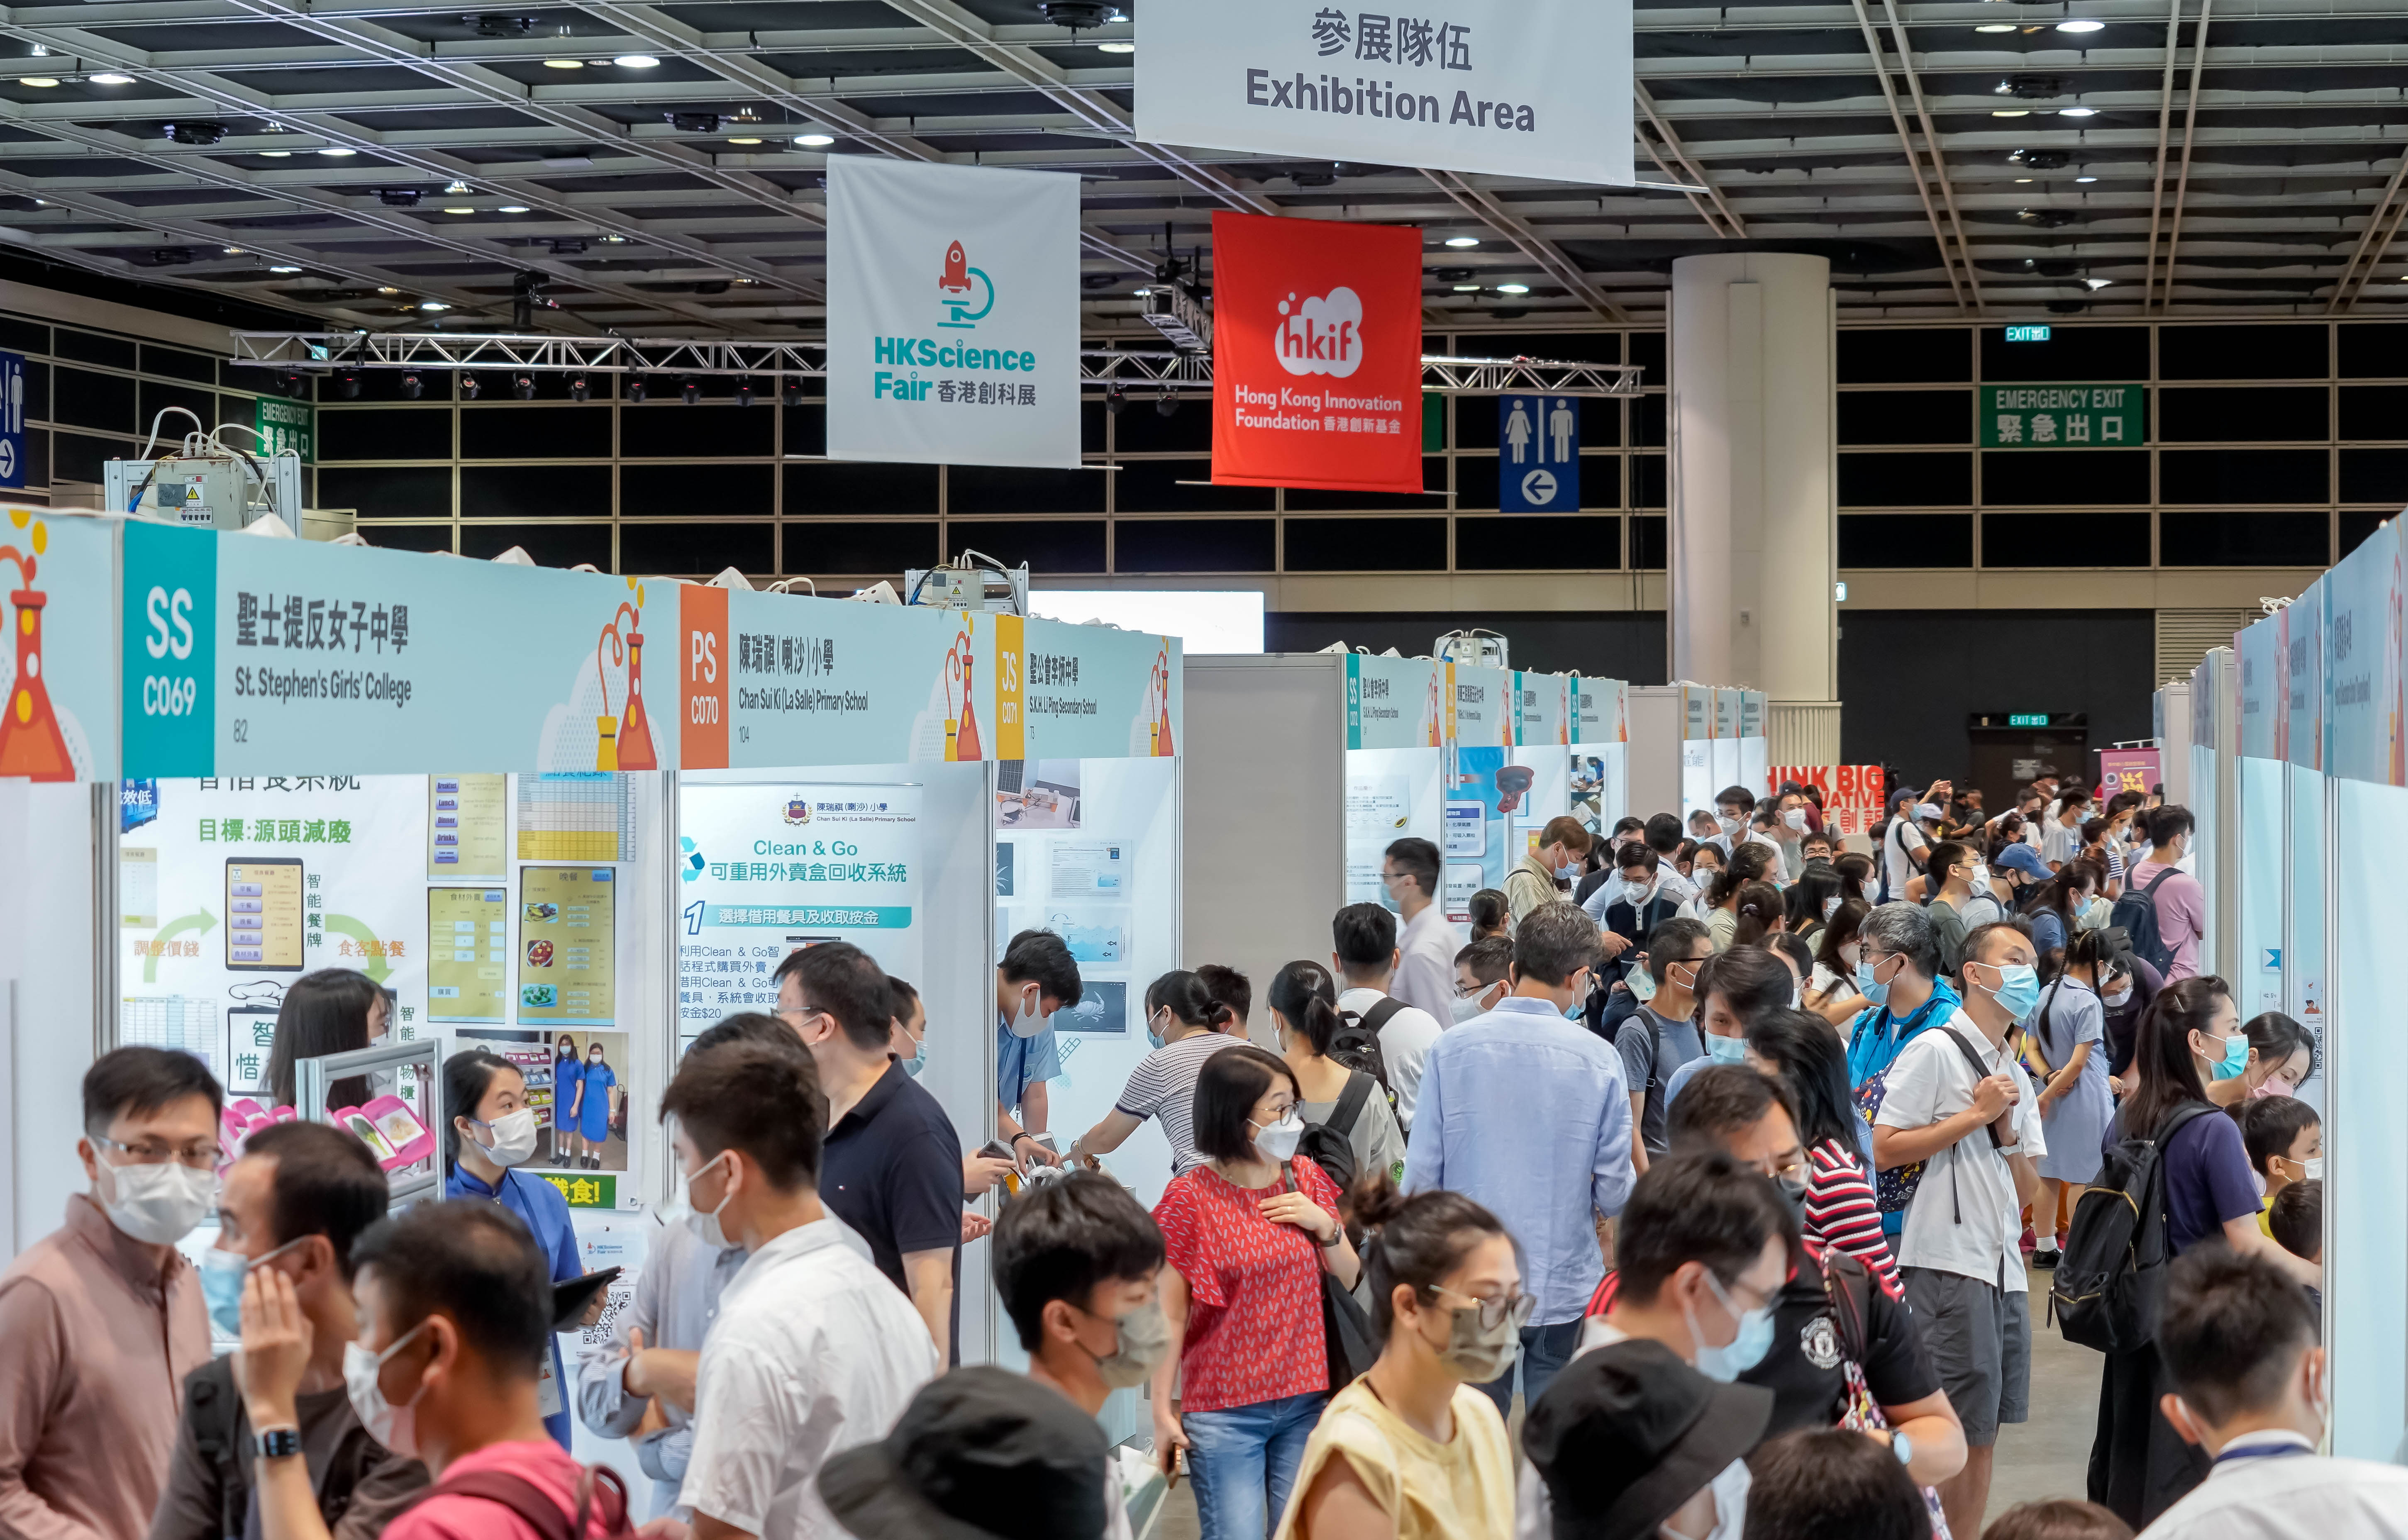 The inaugural Hong Kong Science Fair attracted over 11,000 visitors and has become one of the most important I&T events.